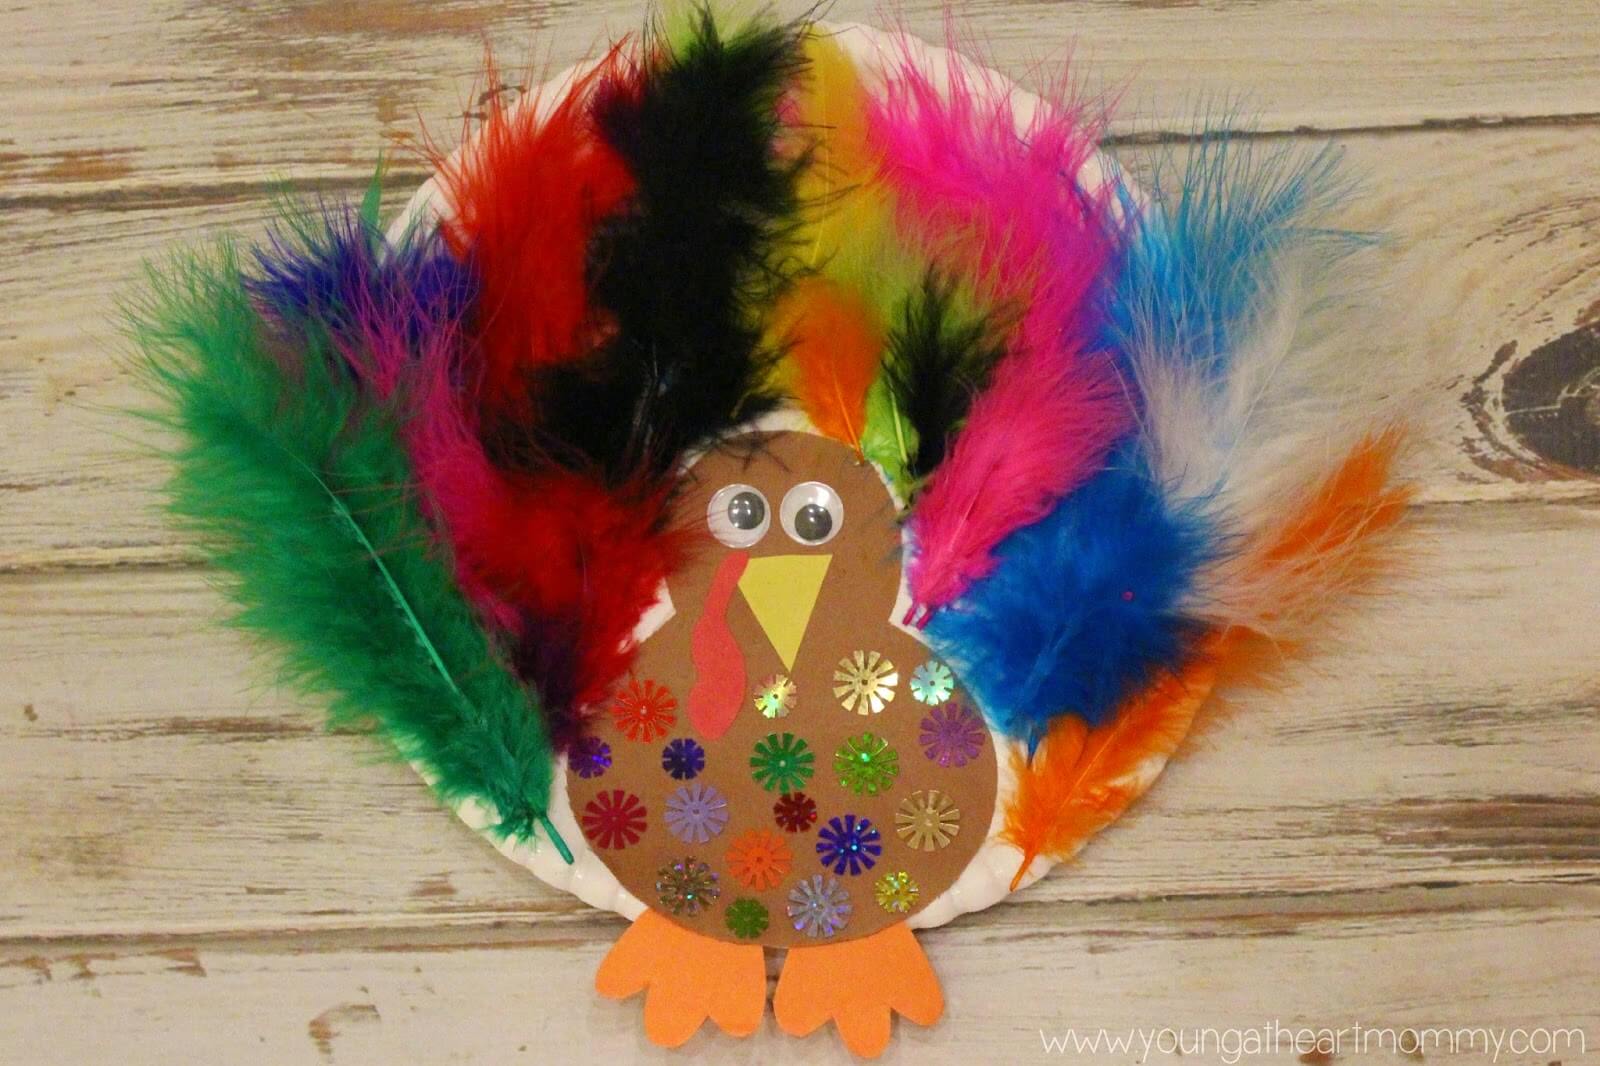 Beautiful Turkey Craft Made With Colorful Feathers, Paper Plate, Construction Paper, Googly Eyes & Embellishments - Feather Arts & Crafts For Children